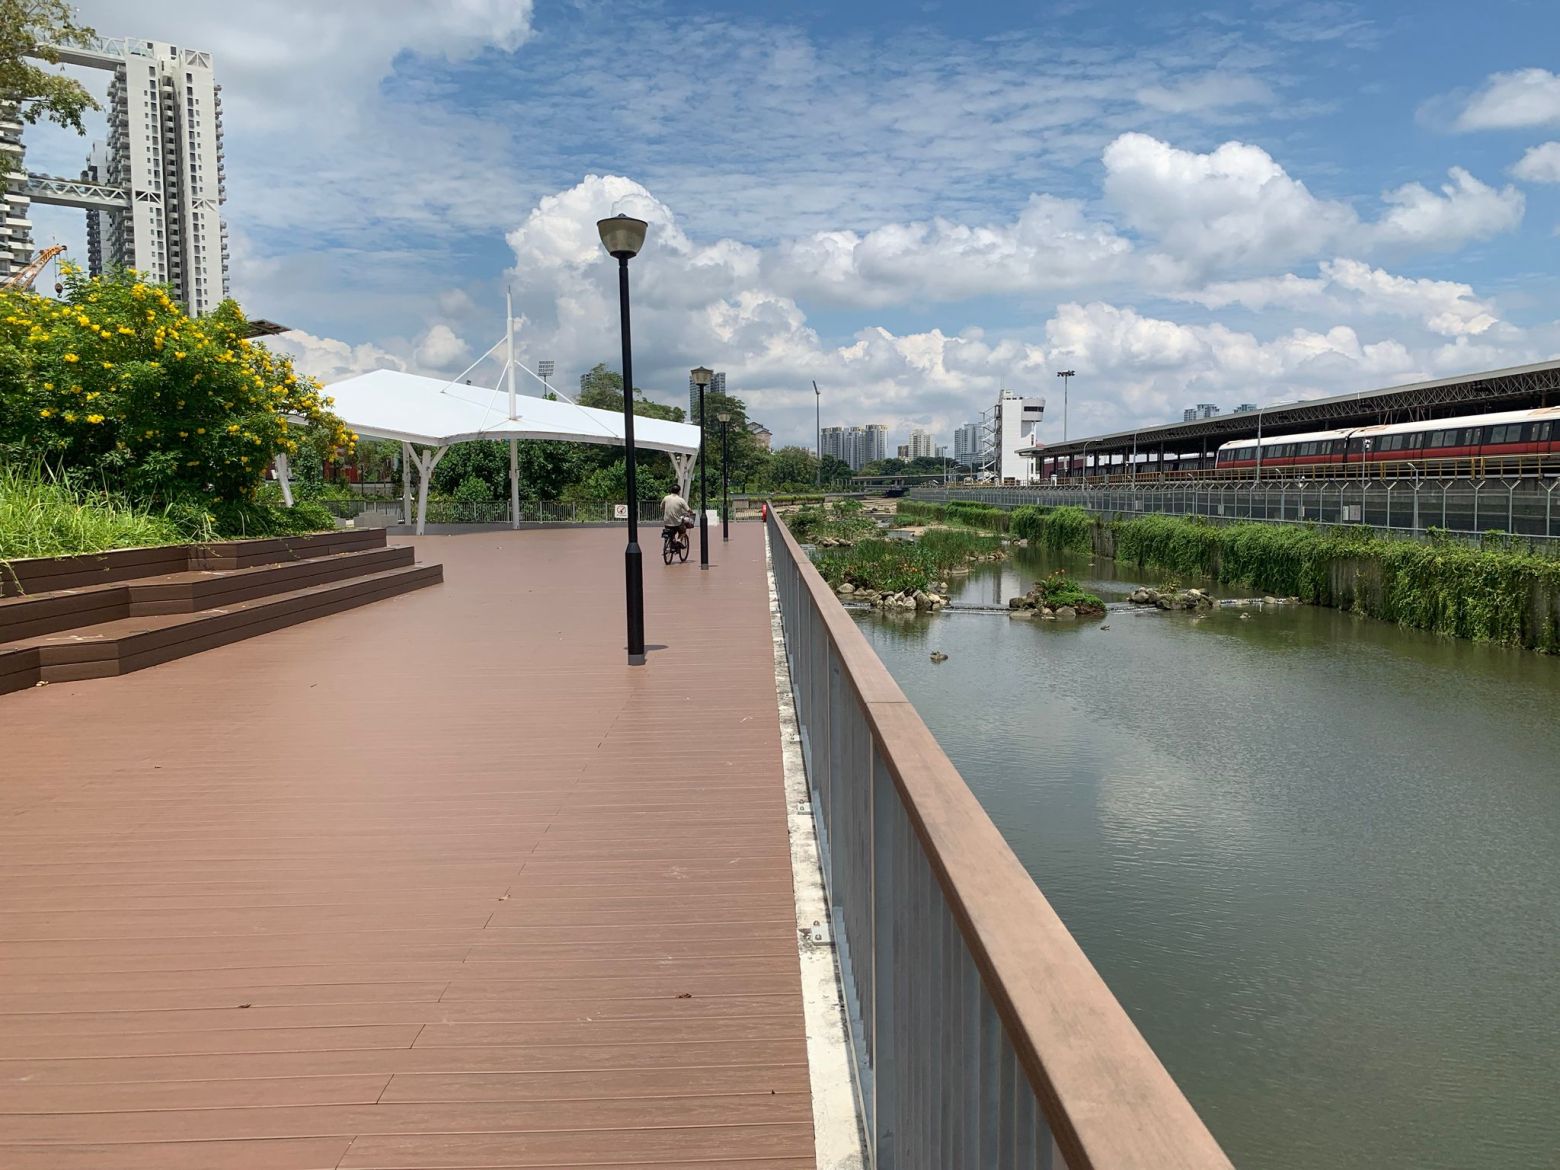 ABC Waters Feature Design, Community Deck and Pavilion, Improvement Works to Kallang River, Singapore